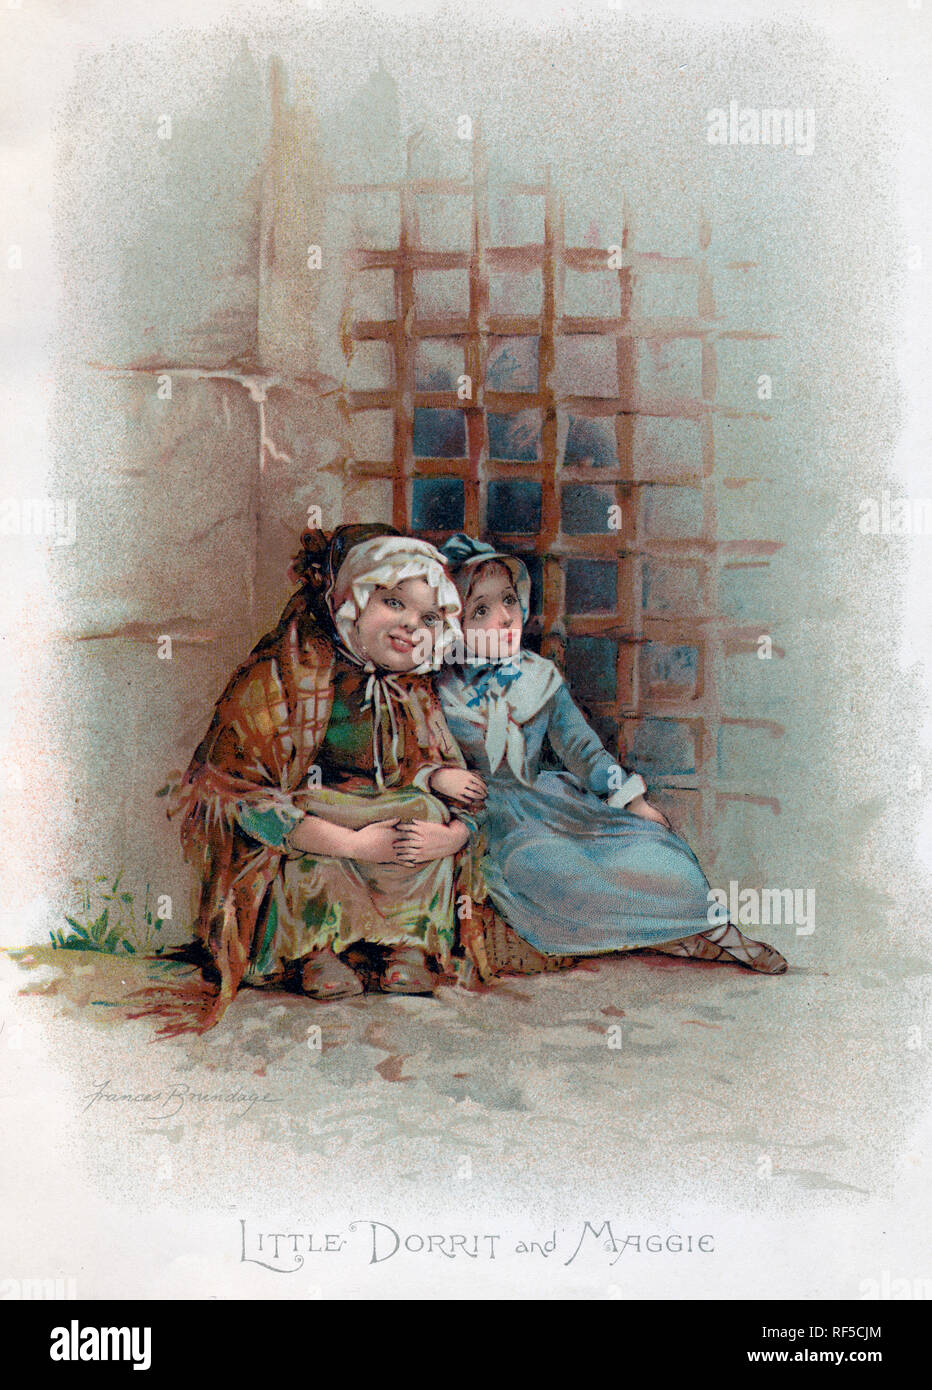 Little Dorrit and Maggie, c1890s. By Frances Brundage (1854-1937). Little Dorrit is a novel by Charles Dickens, originally published in serial form between 1855 and 1857. Stock Photo